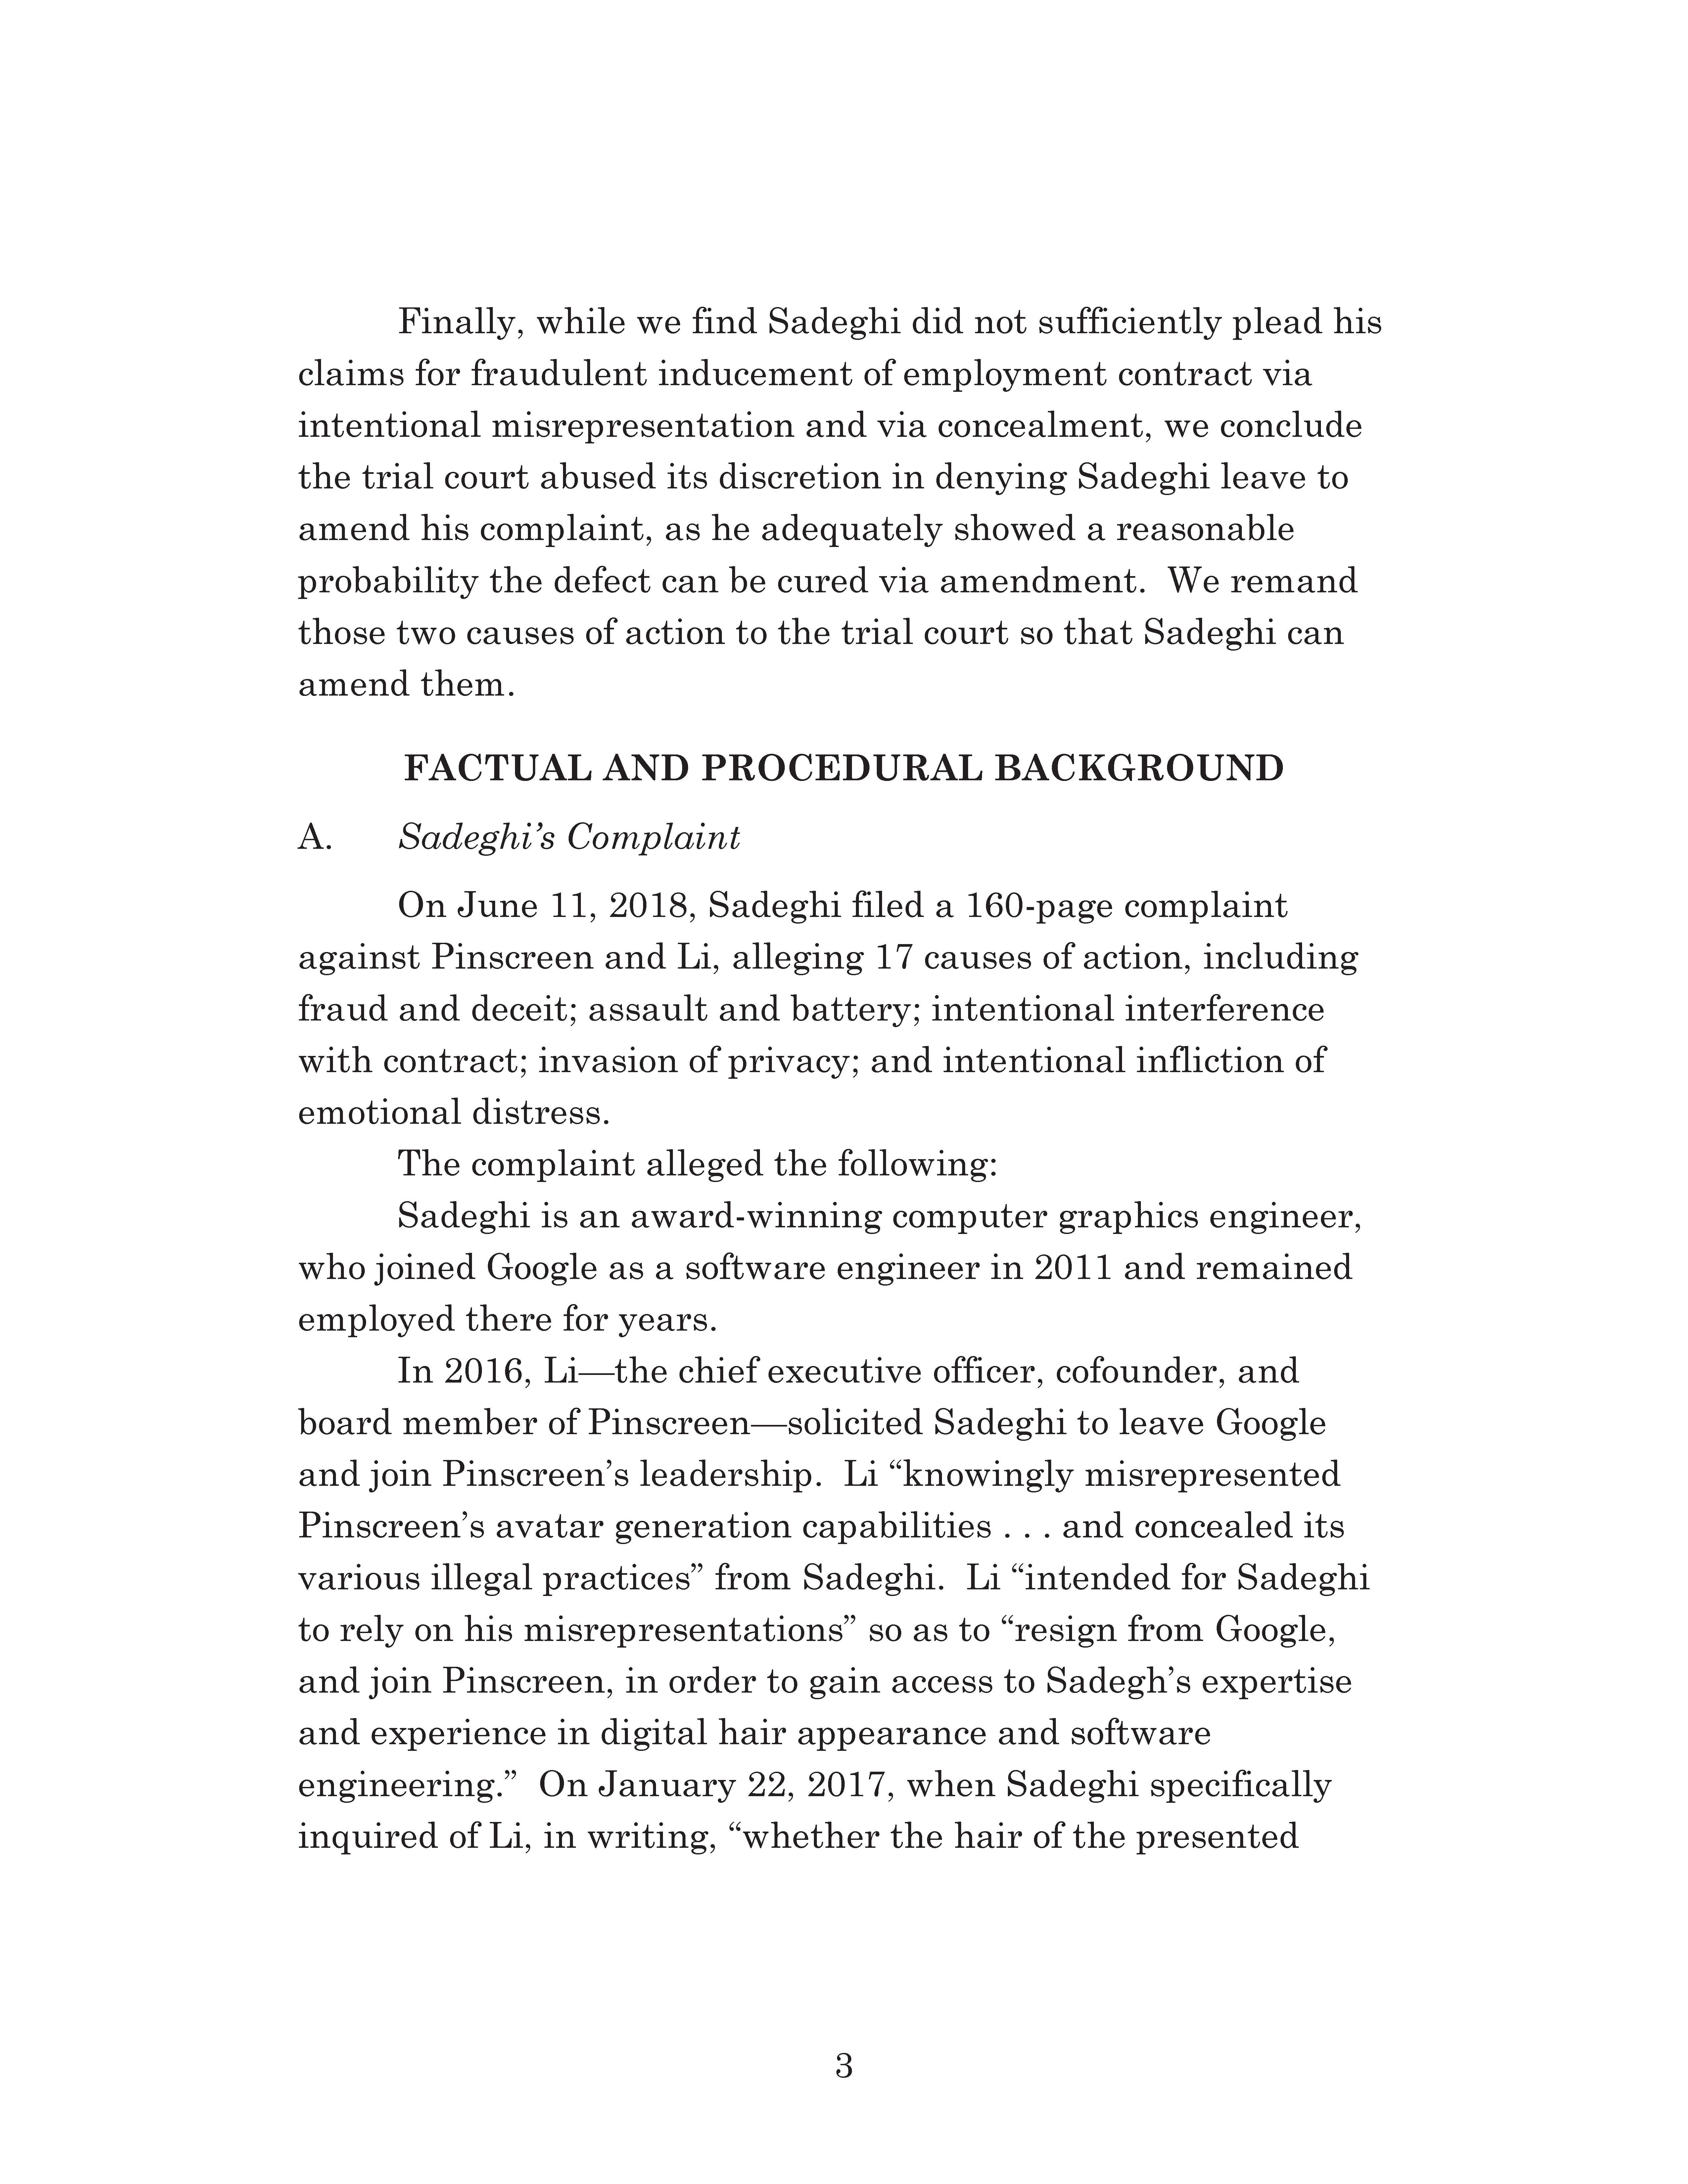 Appellate Court's Opinion Upholding Sadeghi's Claims for Fraud, Battery and IIED Against Li Page 3